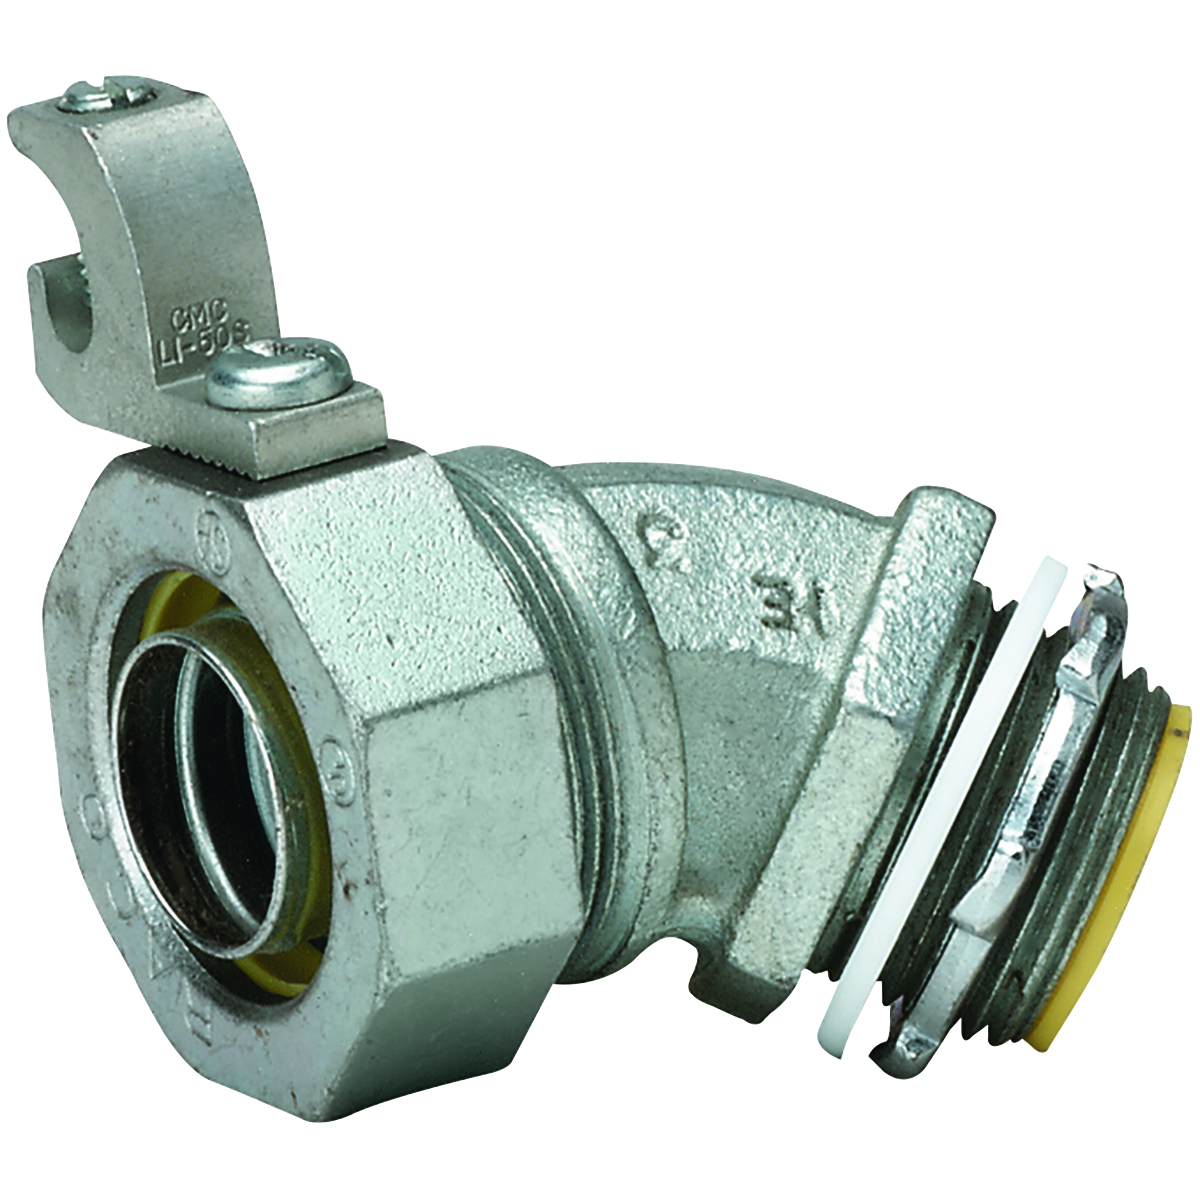 Killark K07541-G Grounded Insulated Liquidtight Connector With Lay-In Grounding Lug, 3/4 in Trade, 45 deg, Malleable Iron/Steel, Electro-Plated Zinc